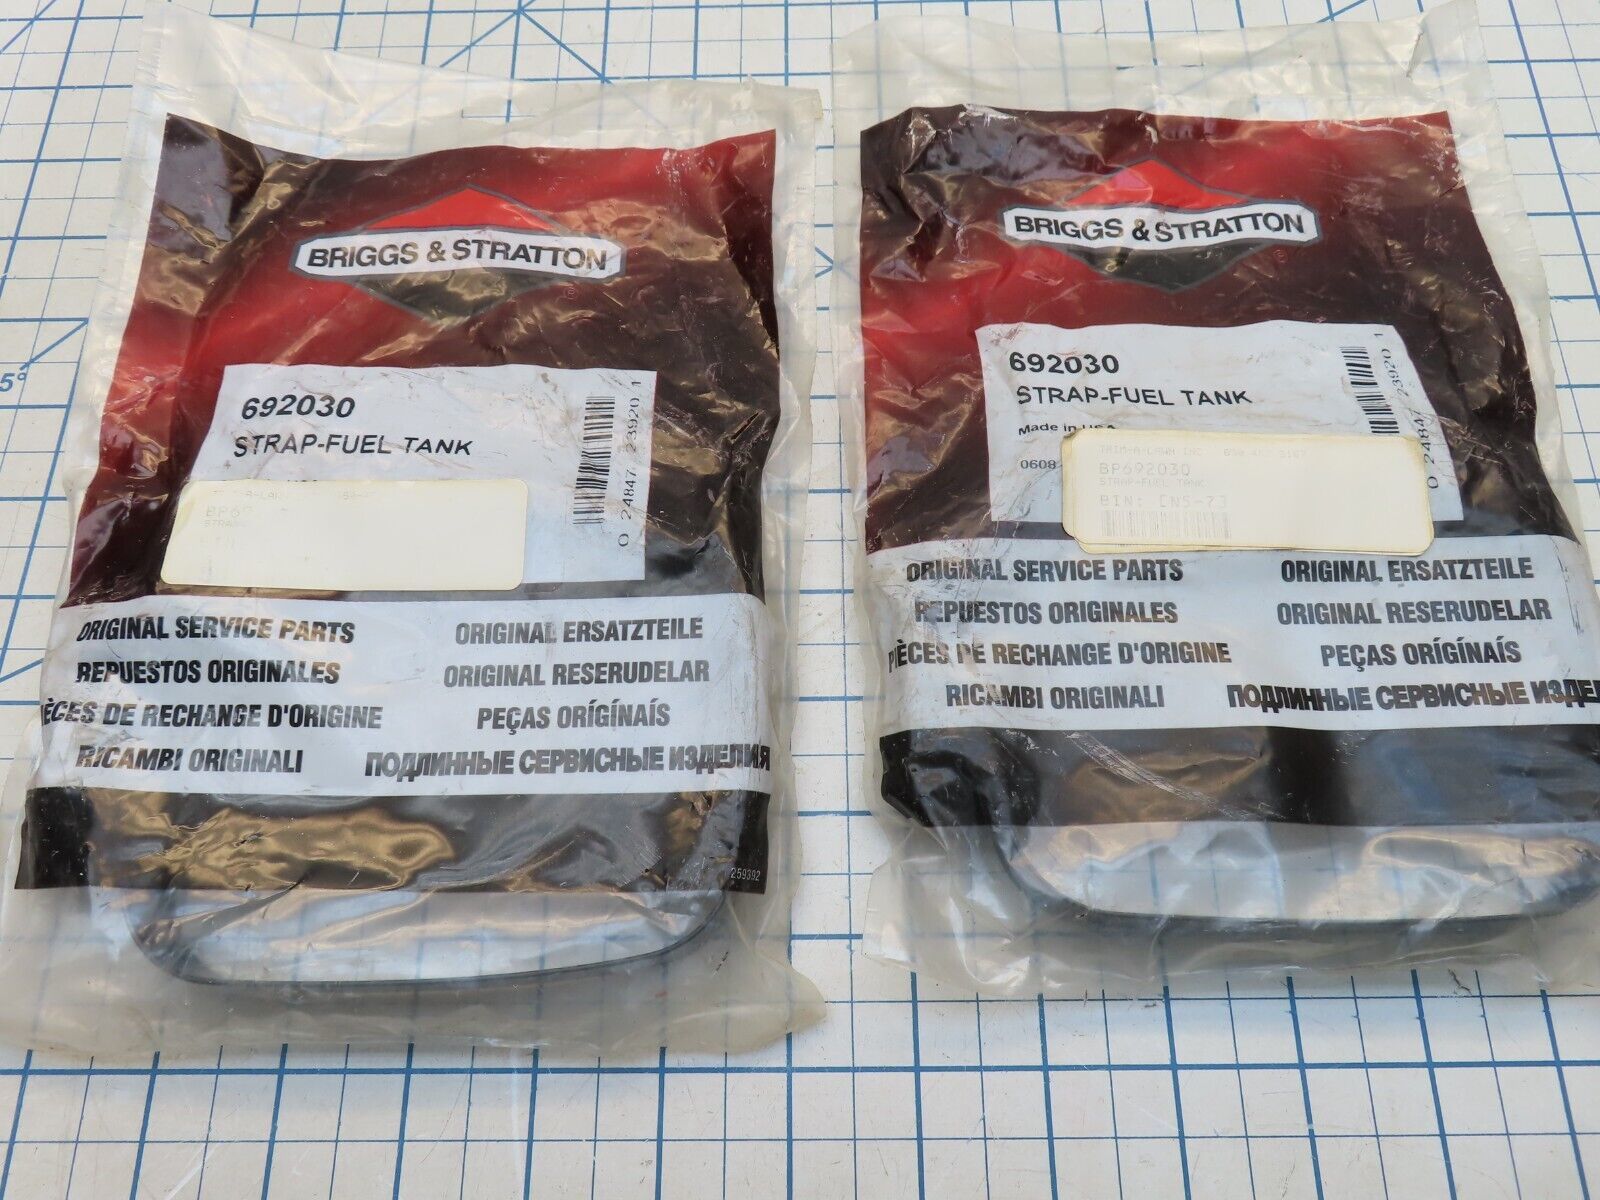 Briggs & Stratton 692030 Fuel Tank Strap Factory Sealed 2 Pack - $24.17